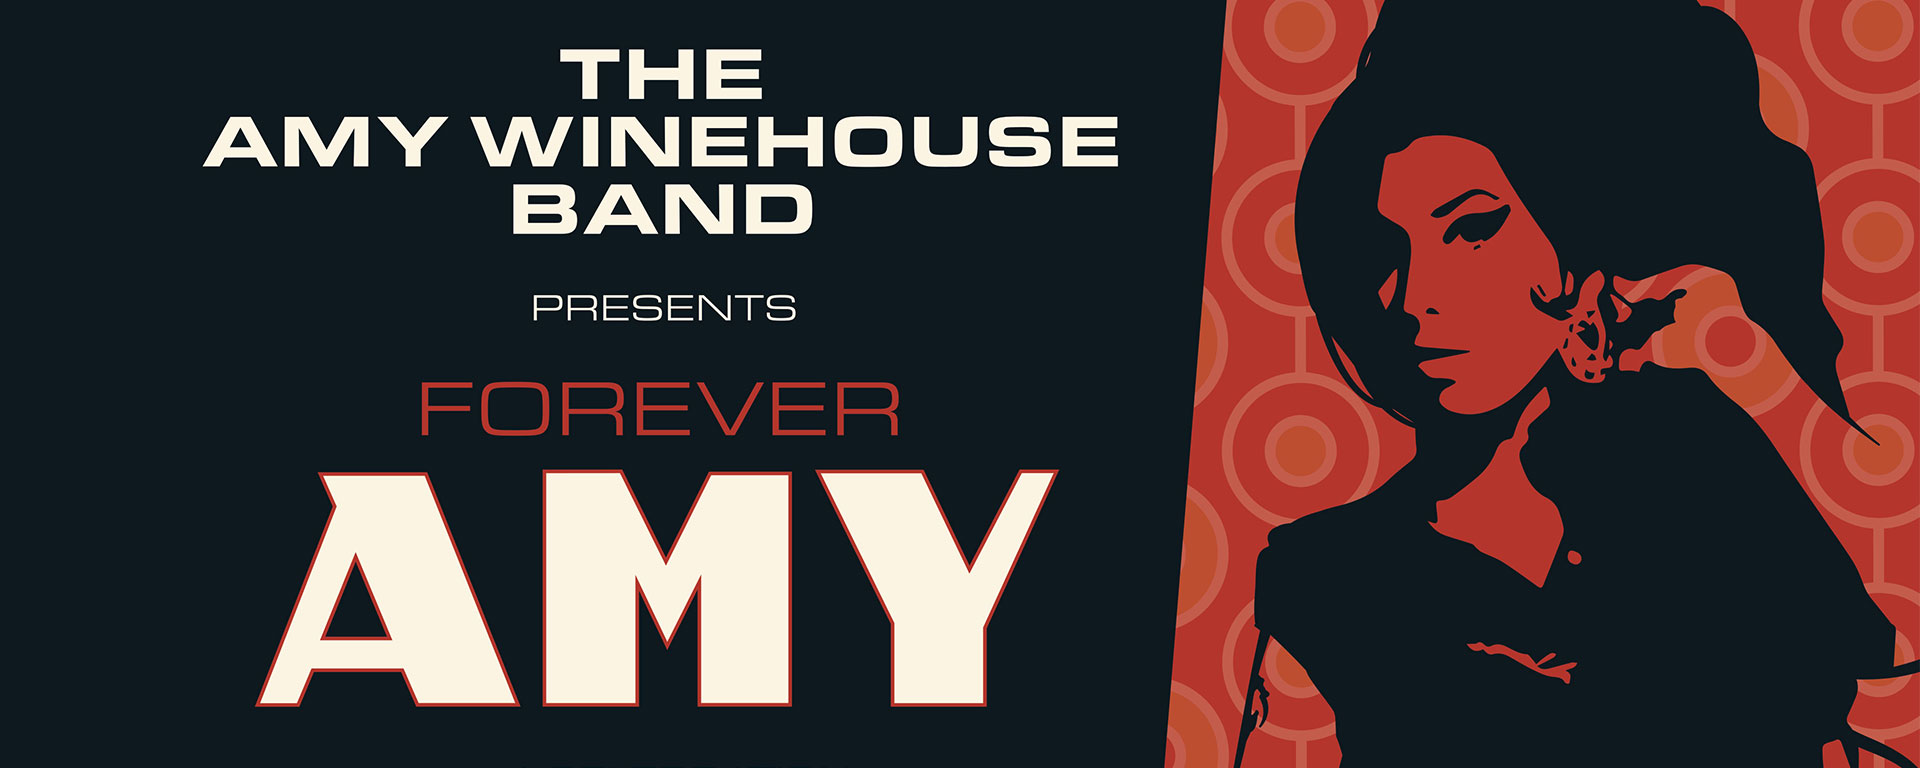 The Amy Winehouse Band - Forever Amy